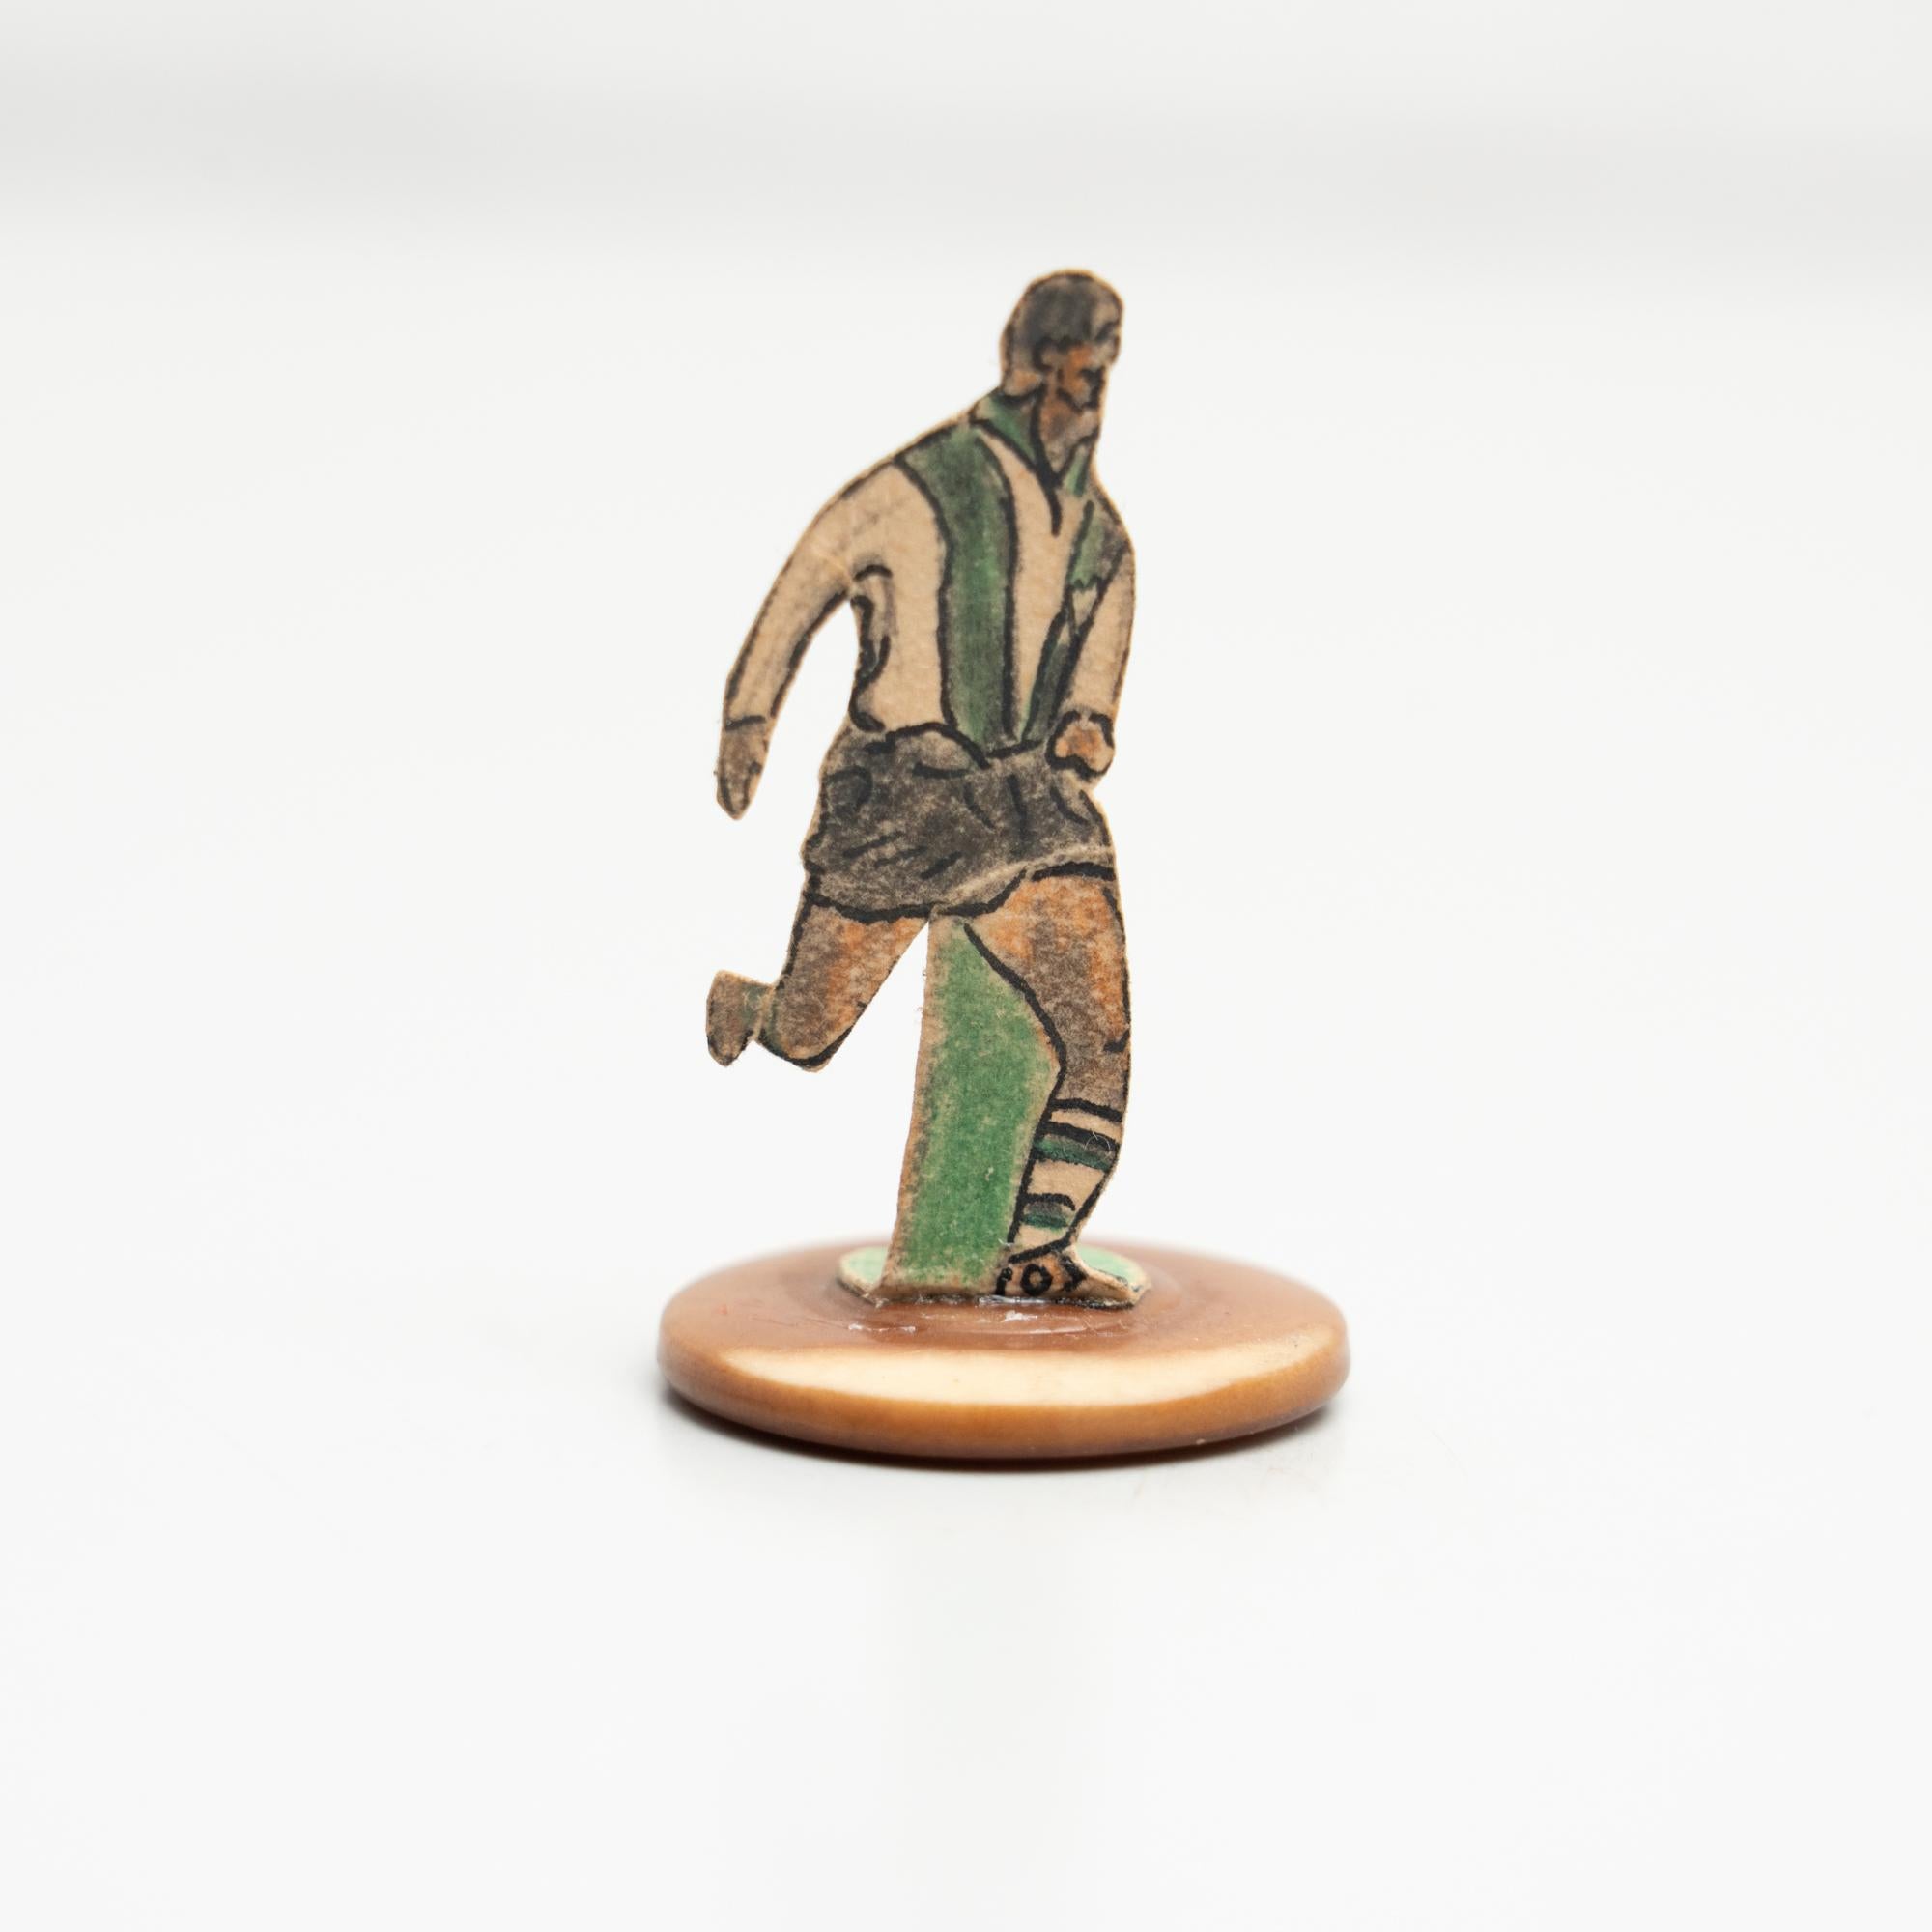 Set of 5 Traditional Antique Button Soccer Game Figures, circa 1950 For Sale 2